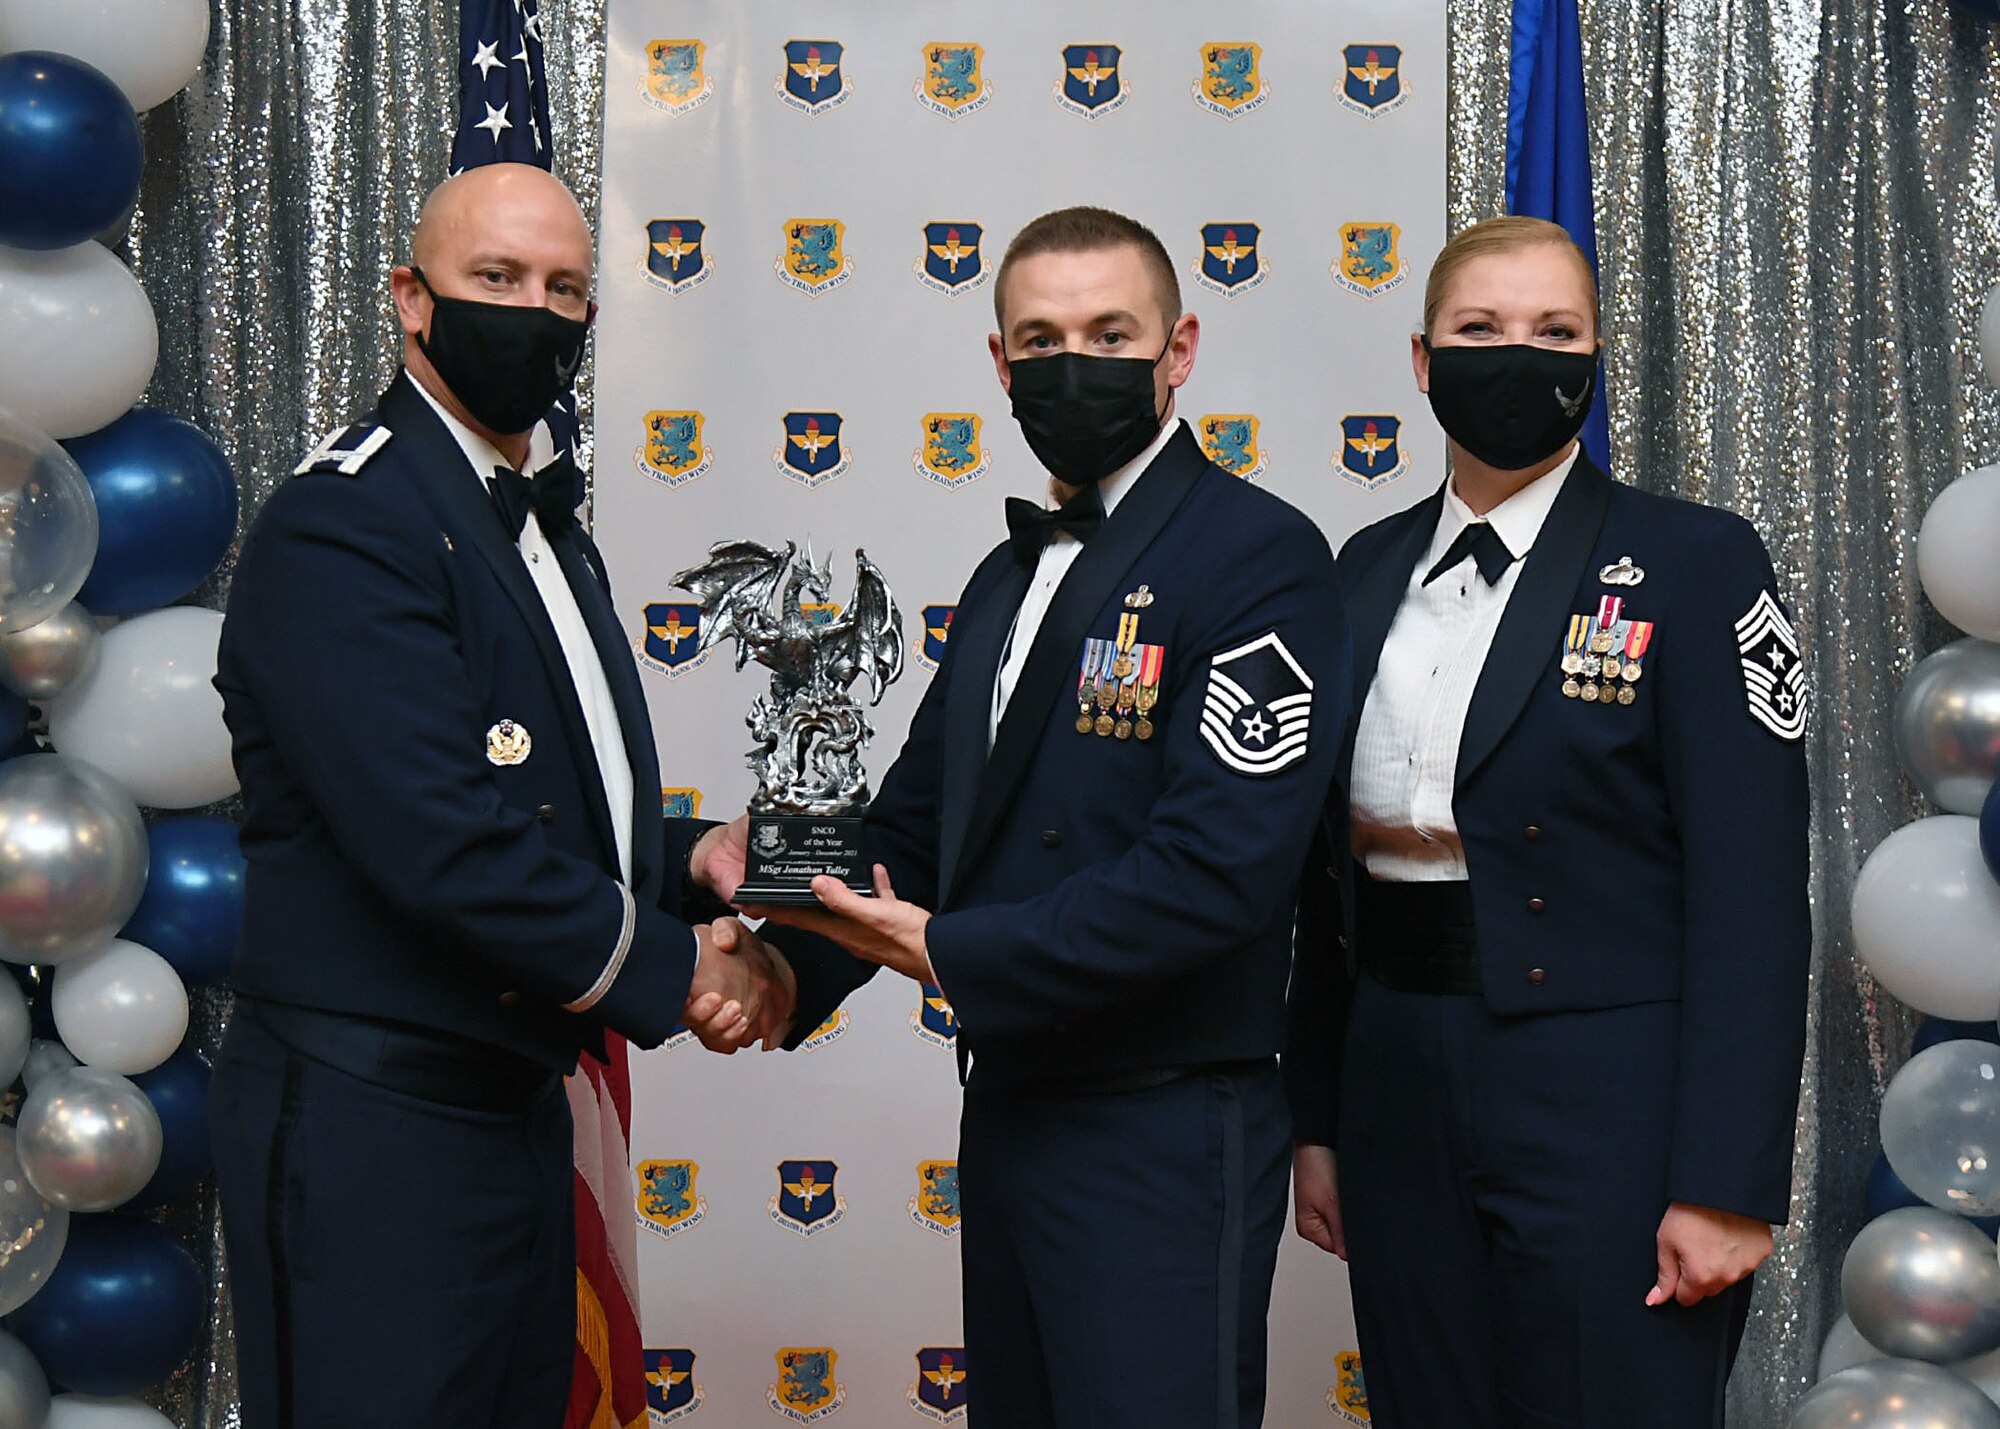 U.S. Air Force Col. William Hunter, 81st Training Wing commander, and Chief Master Sgt. Sarah Esparza, 81st TRW command chief, present Master Sgt. Jonathan Talley, 81st Security Forces Squadron logistics superintendent, with the Senior NCO of the Year award during the 81st Training Wing's 2021 Annual Awards Ceremony inside the Bay Breeze Event Center at Keesler Air Force Base, Mississippi, Feb. 17, 2022. During the ceremony, base leadership recognized outstanding Airmen and civilians from across the installation for their accomplishments throughout 2021. (U.S. Air Force photo by Kemberly Groue)